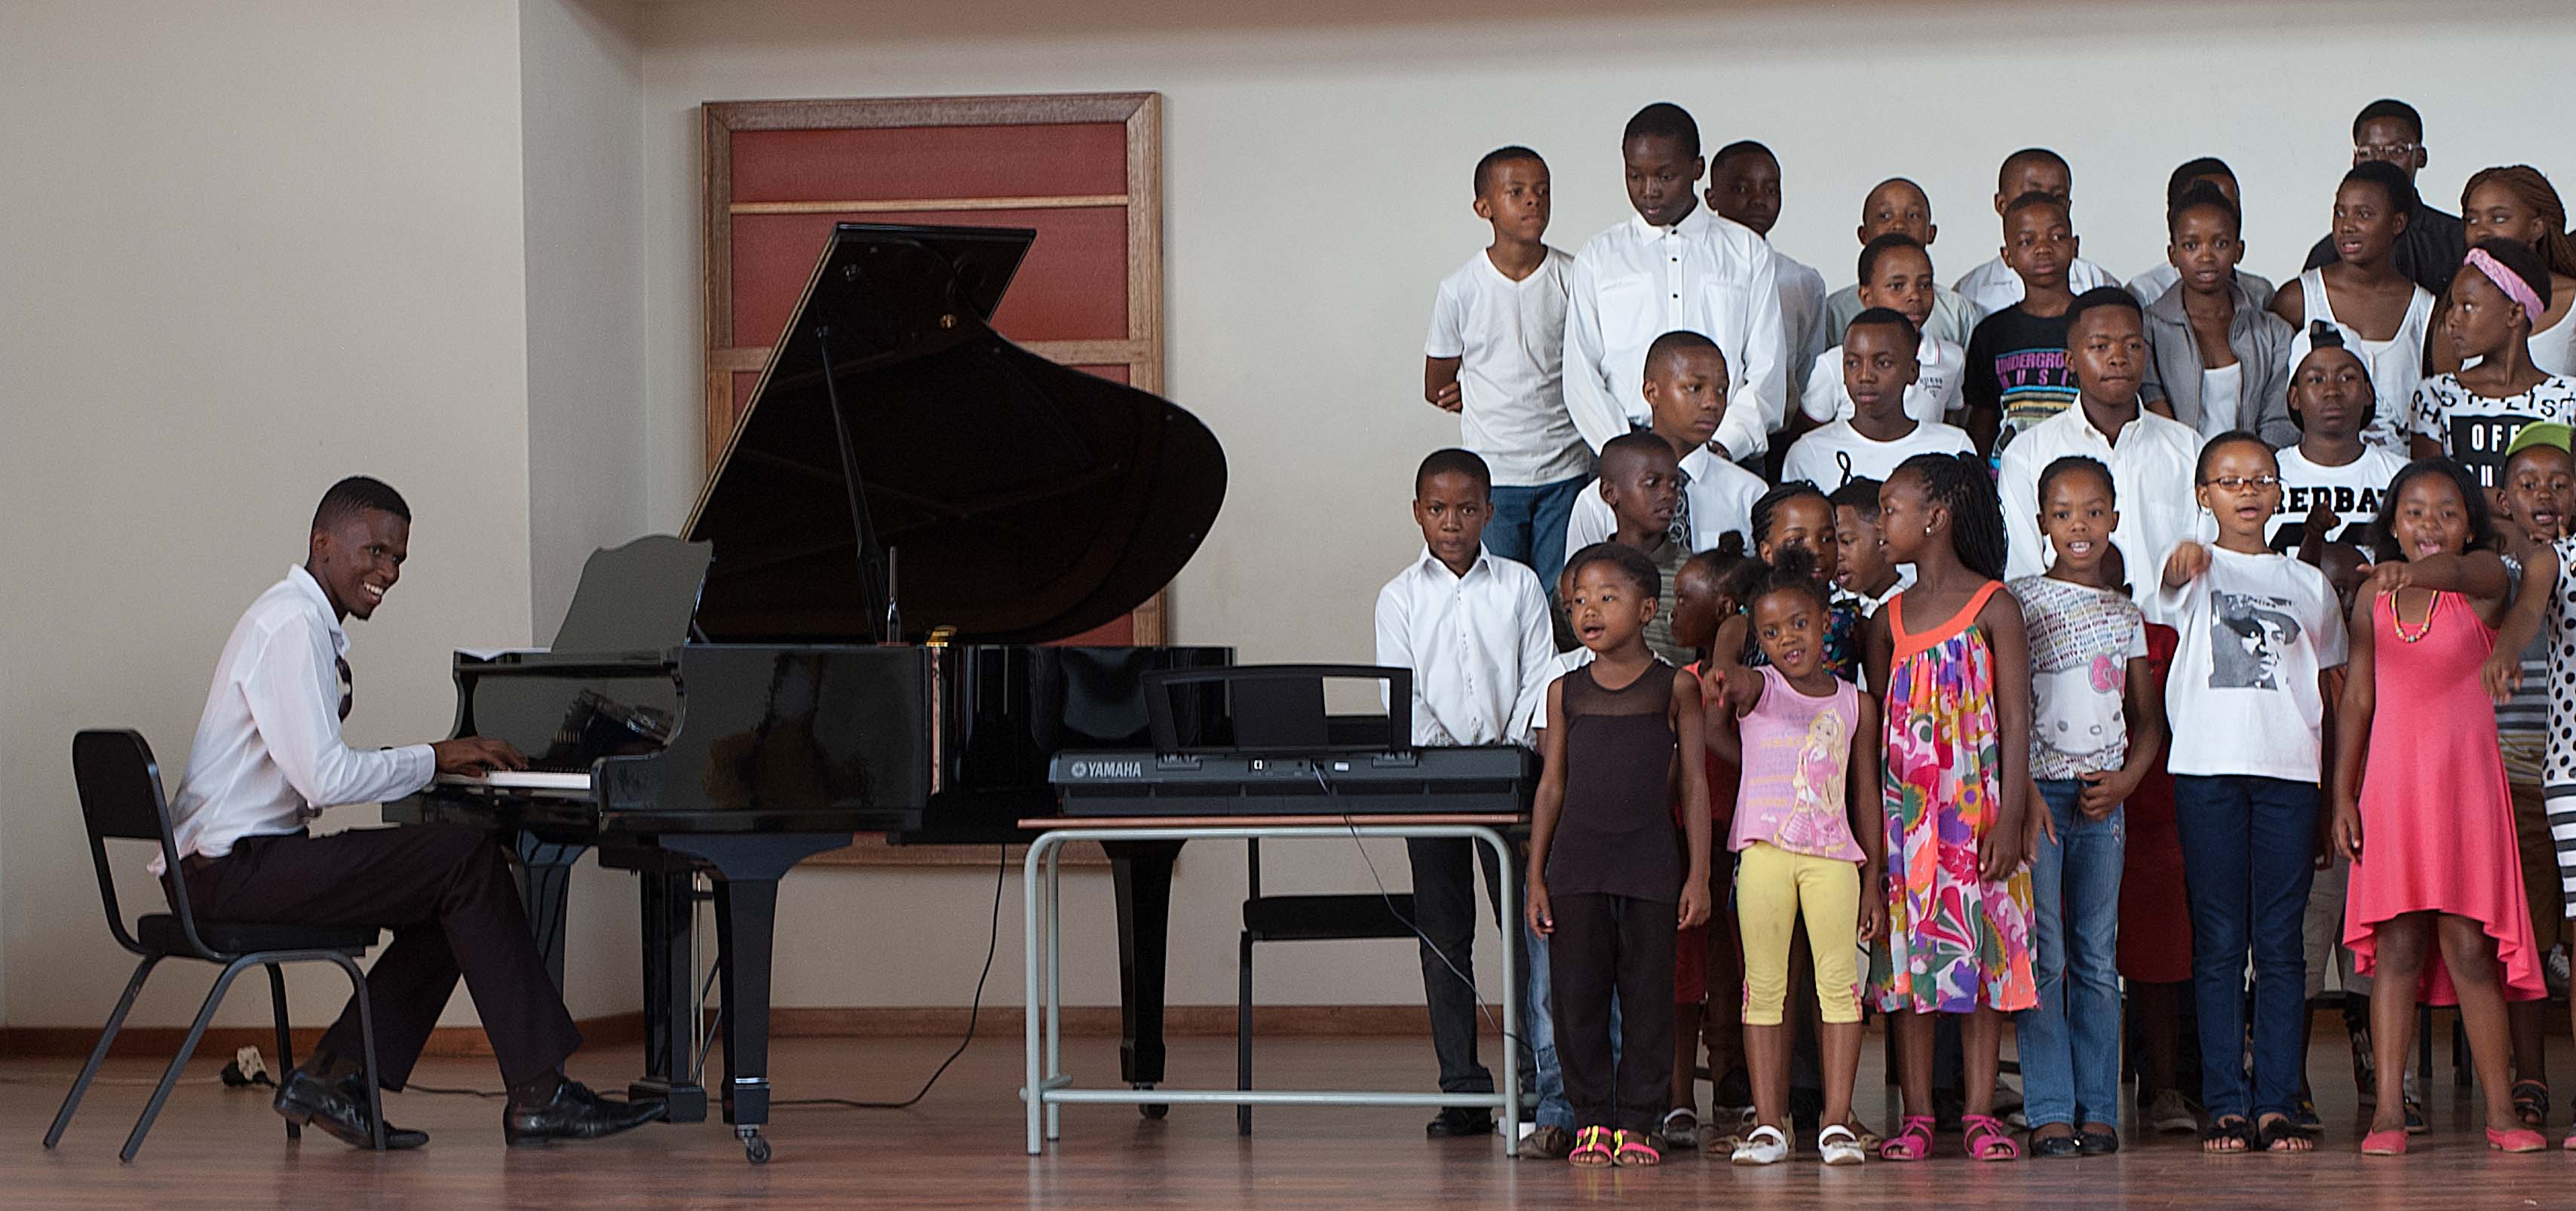 Grand Piano and Choir at Music Centre